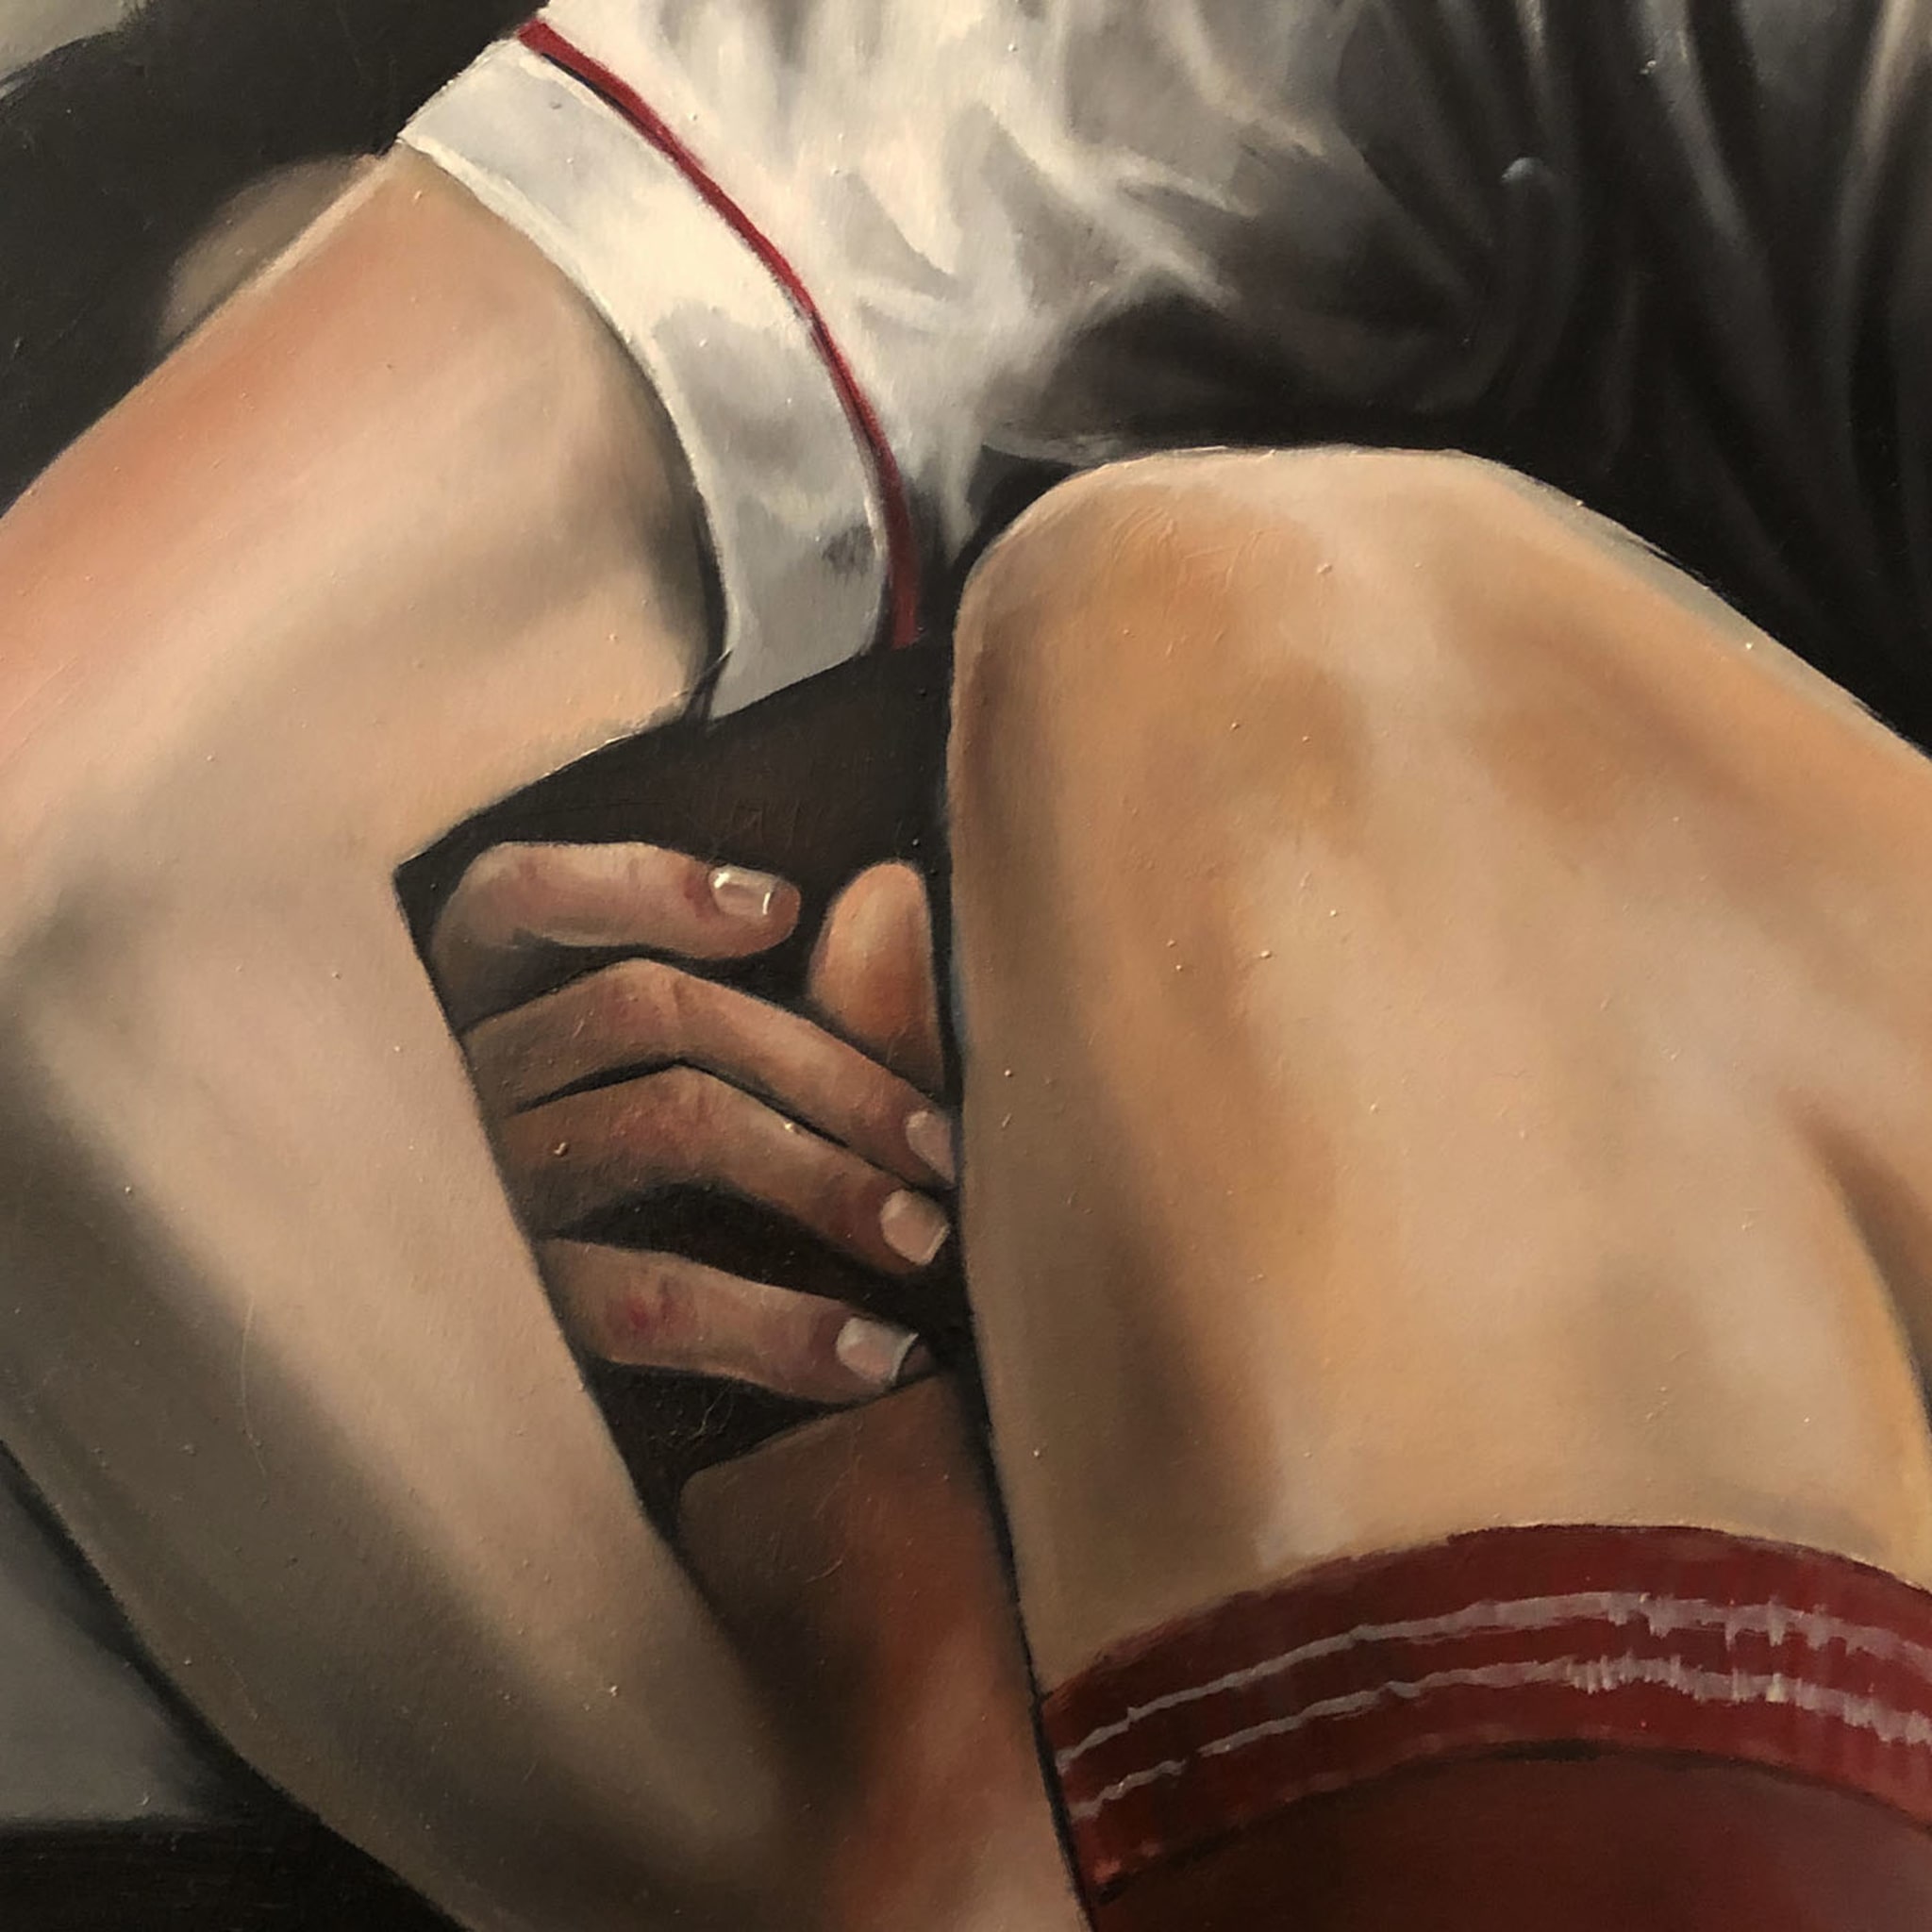 Submissive Affection Painting - Alternative view 2